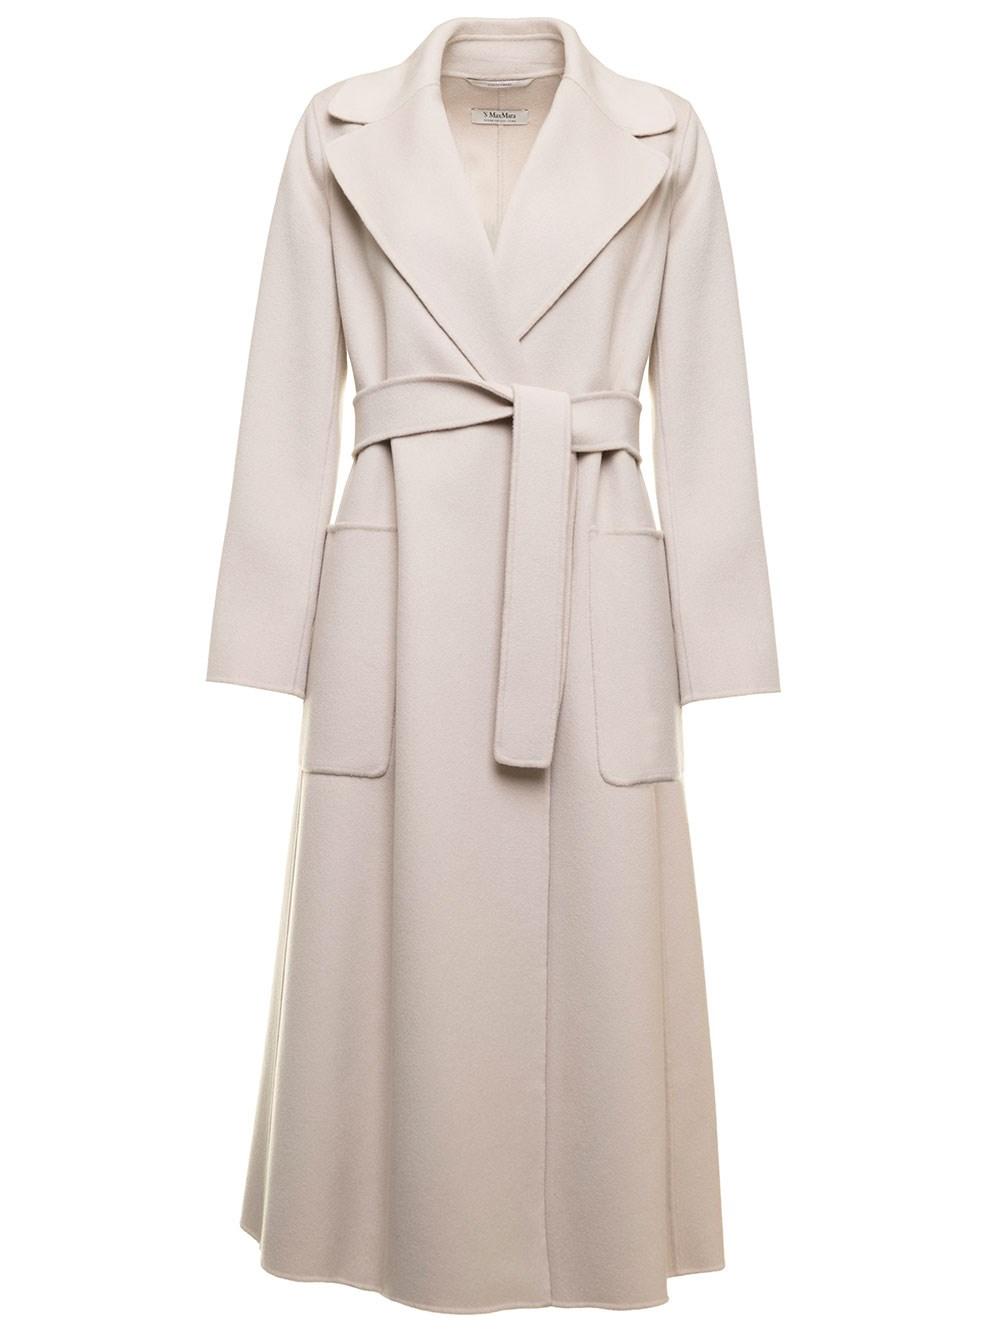 Max Mara Woman's Paolore Ivory Colored Wool Long Coat With Belt in